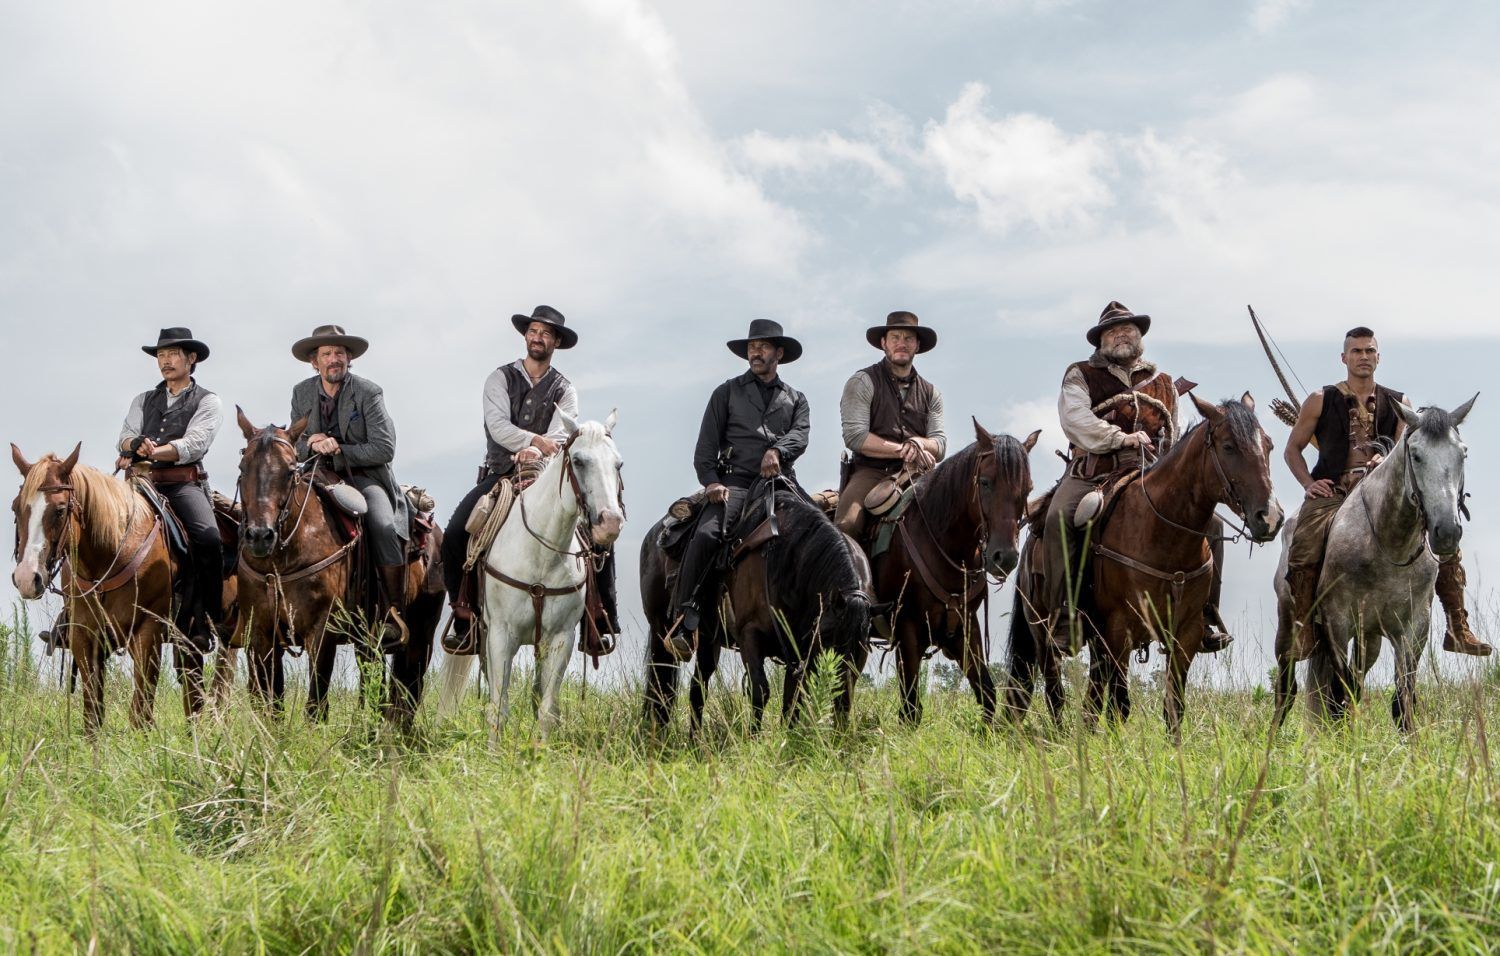 The Magnificent Seven Wallpaper Image Photo Picture Background